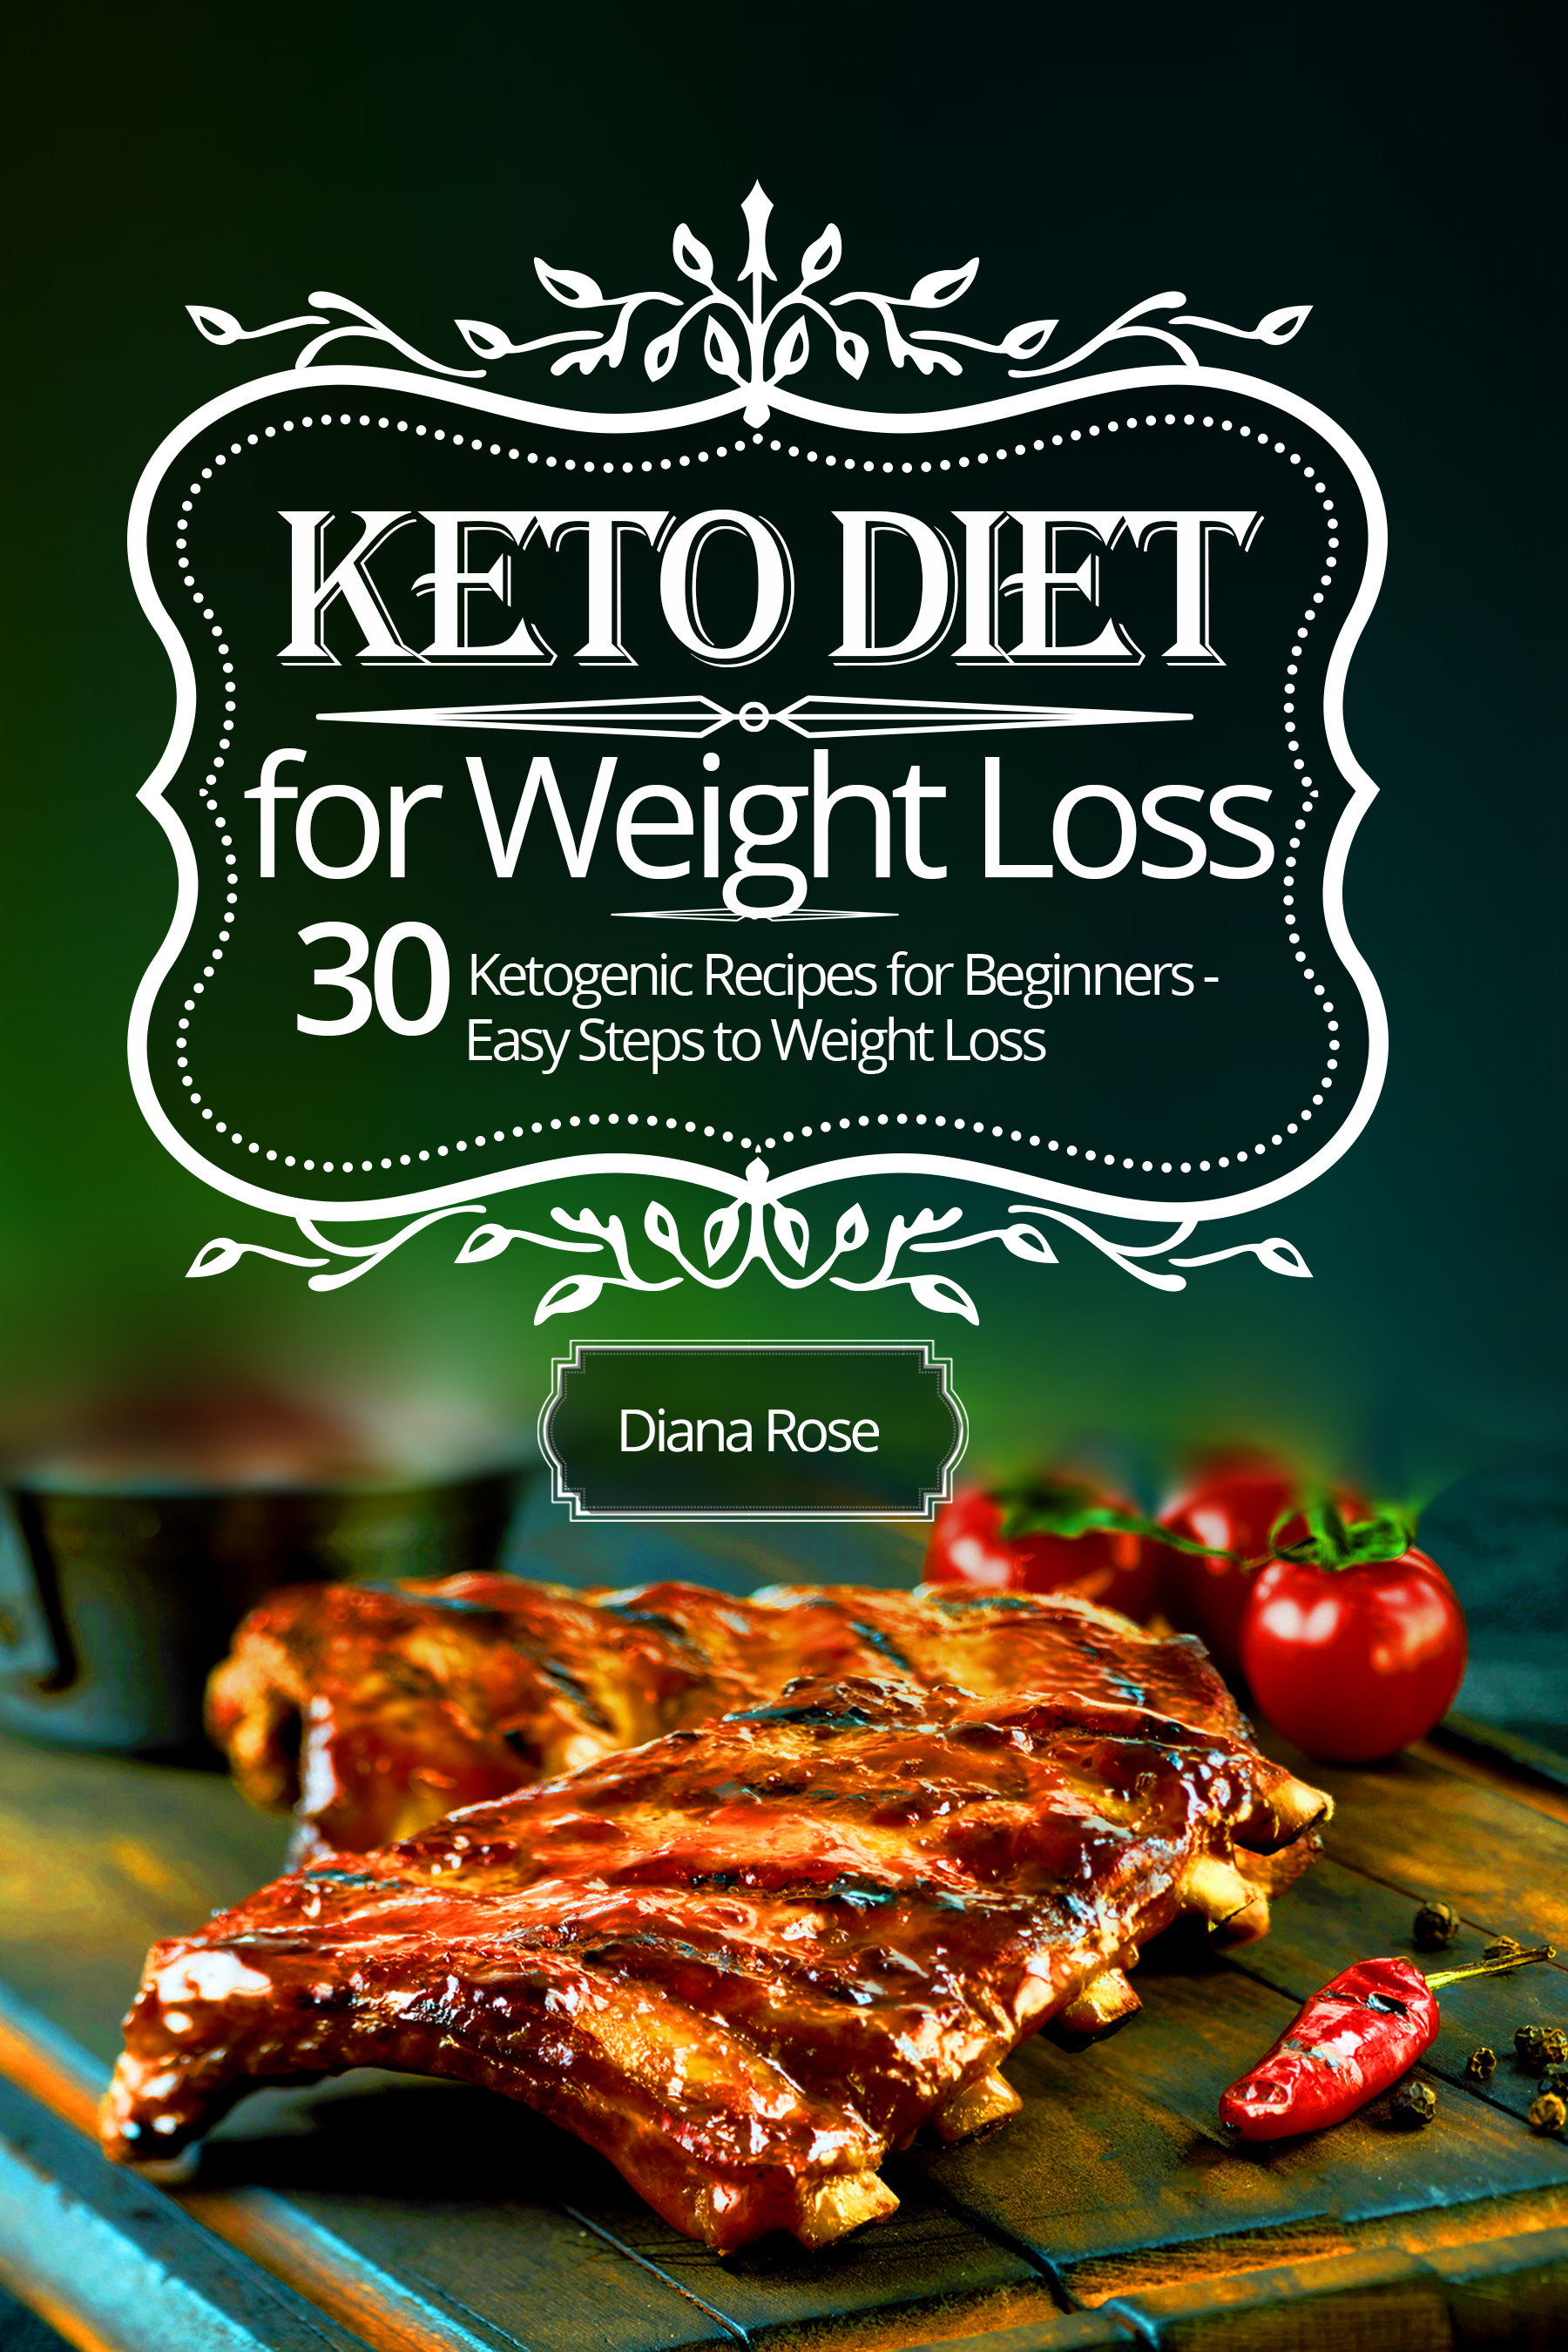 FREE: Keto Diet for Weight Loss: 30 Ketogenic Recipes for Beginners – Easy Steps to Weight Loss by Diana Rose